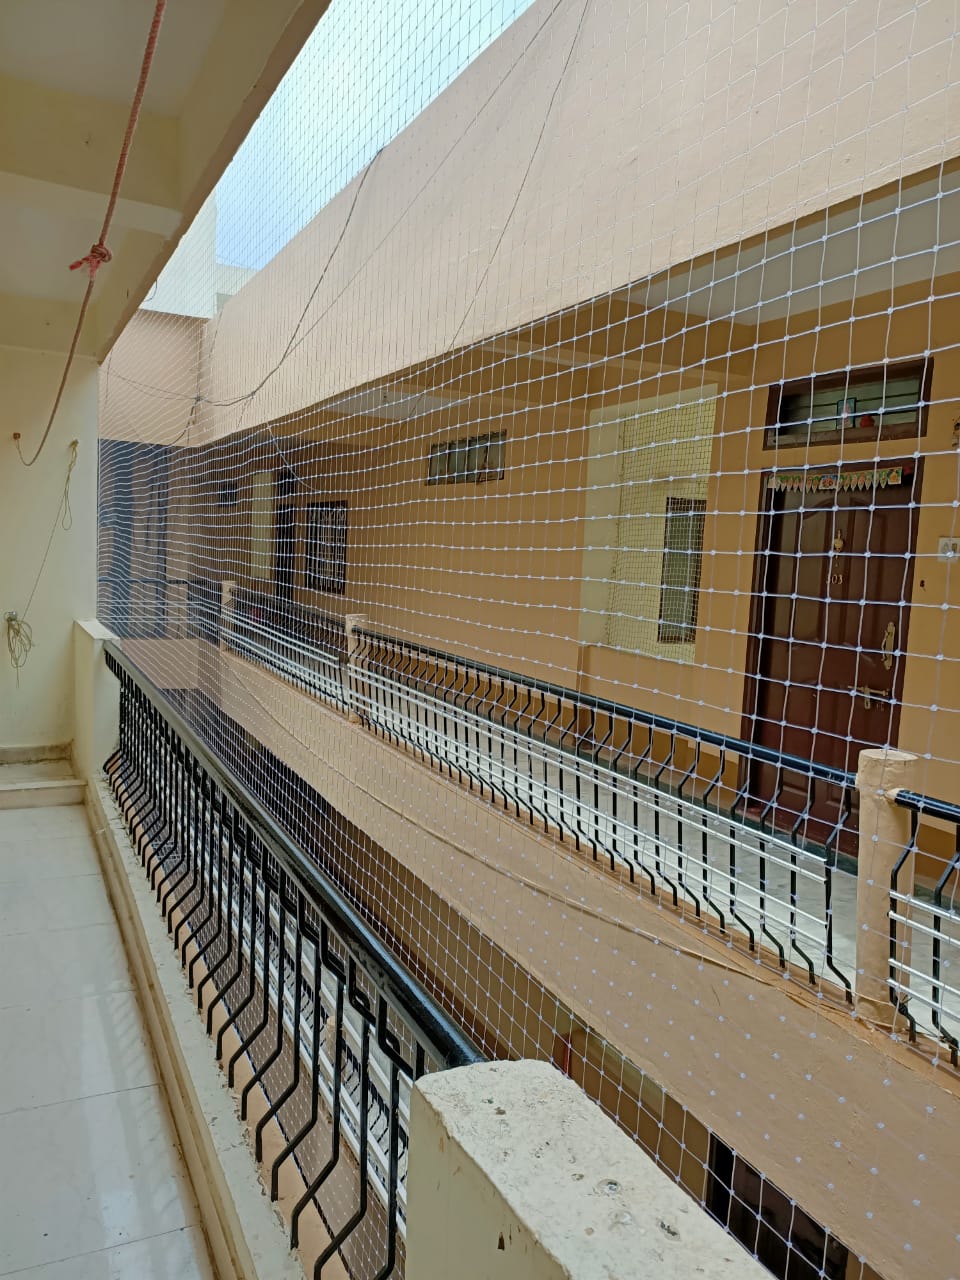 Bird Protection Nets Installation for Balconies in Chennai, Call 9791170467 for Price and Cost.